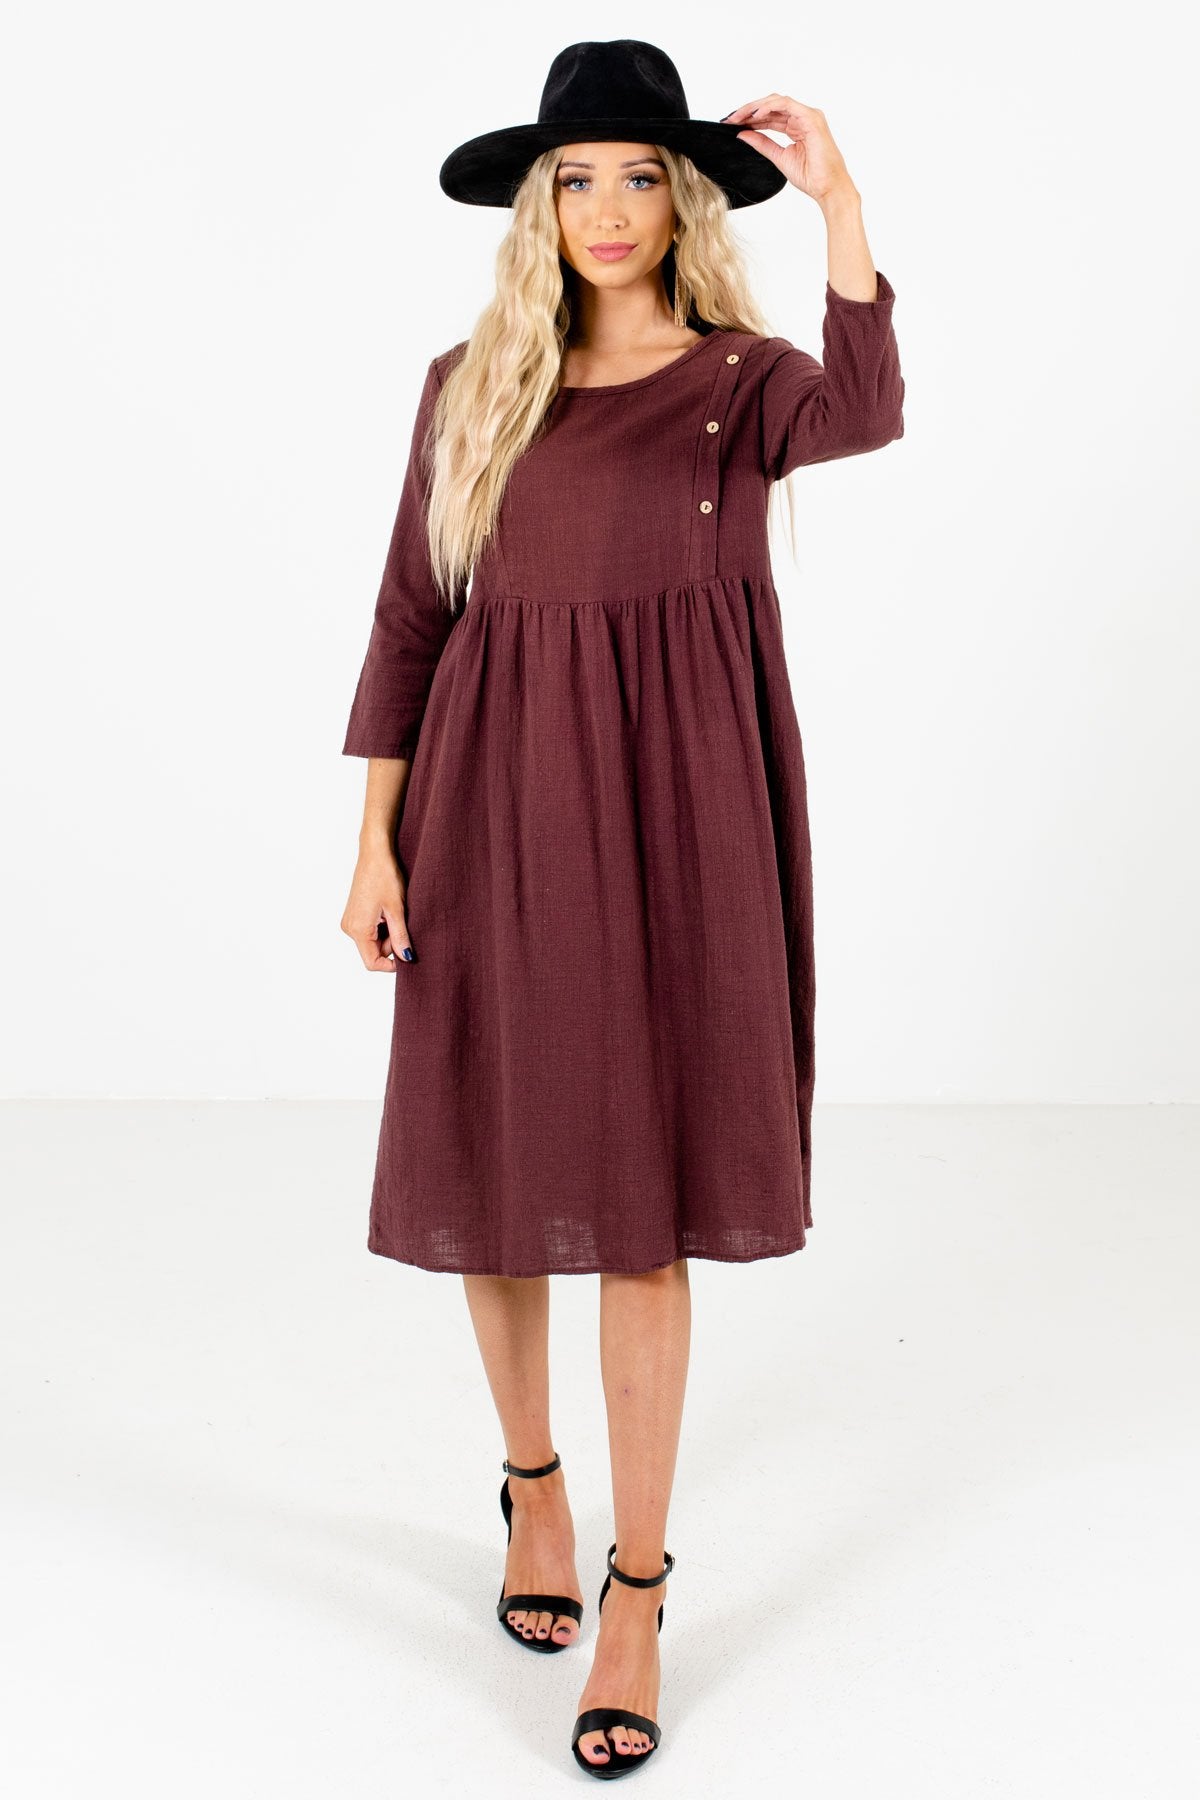 Women’s Purple Casual Everyday Boutique Knee-Length Dress